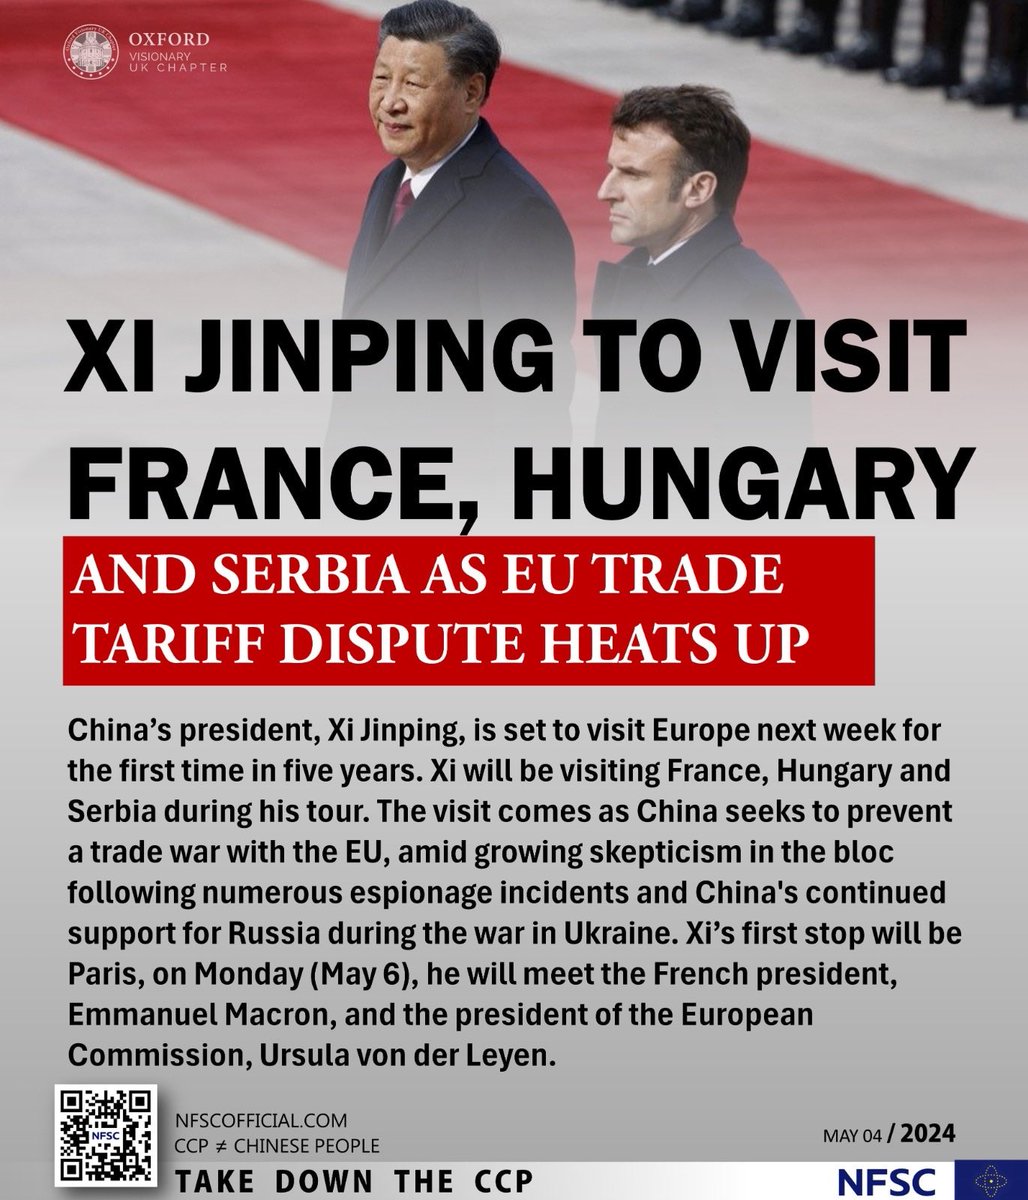 XI JINPING TO VISIT FRANCE, HUNGARY AND SERBIA AS EU TRADE TARIFF DISPUTE HEATS UP
05/04/2024 China's president, #XiJinping, is set to visit Europe next week for the first time in five years. #Xi will be visiting #France, #Hungary and #Serbia during his tour….
#decouplefromchina